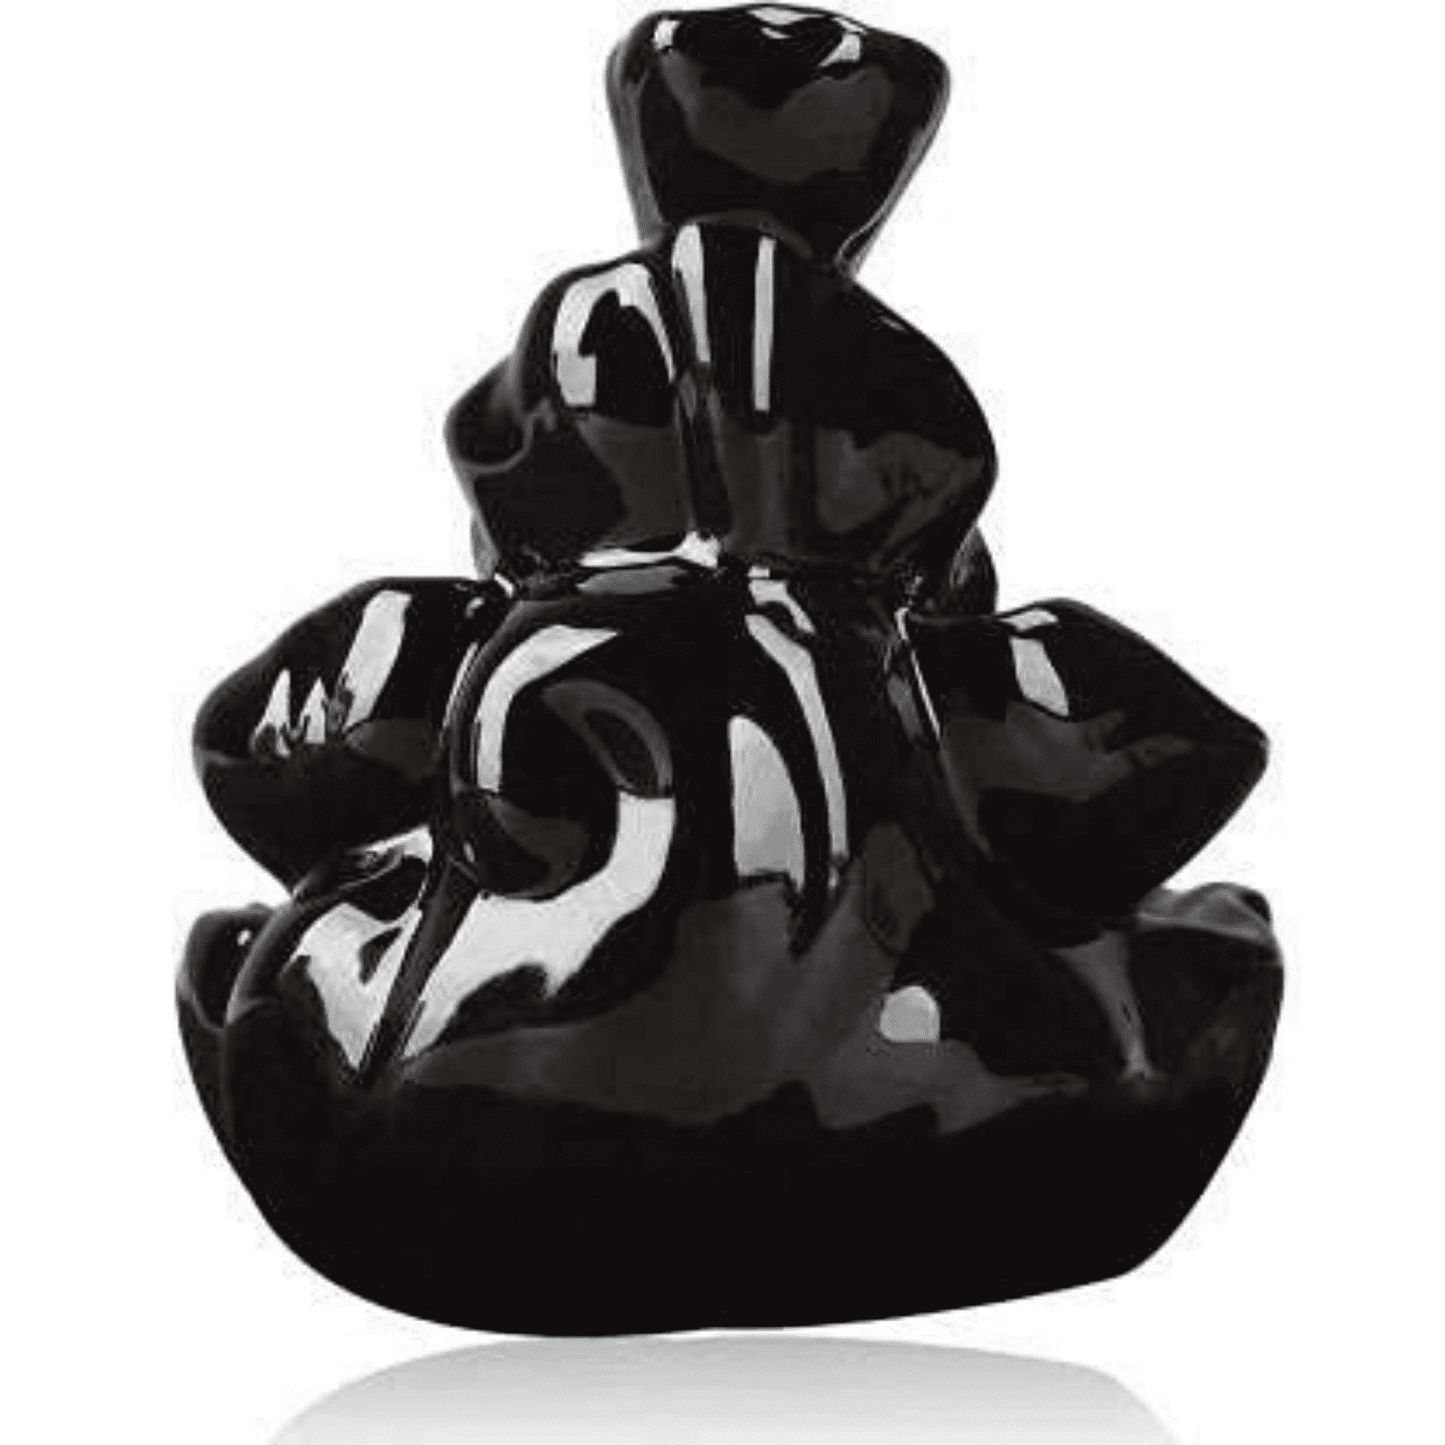 Buy Ceramic Mountain Waterfall Backflow Incense Burner with Cones